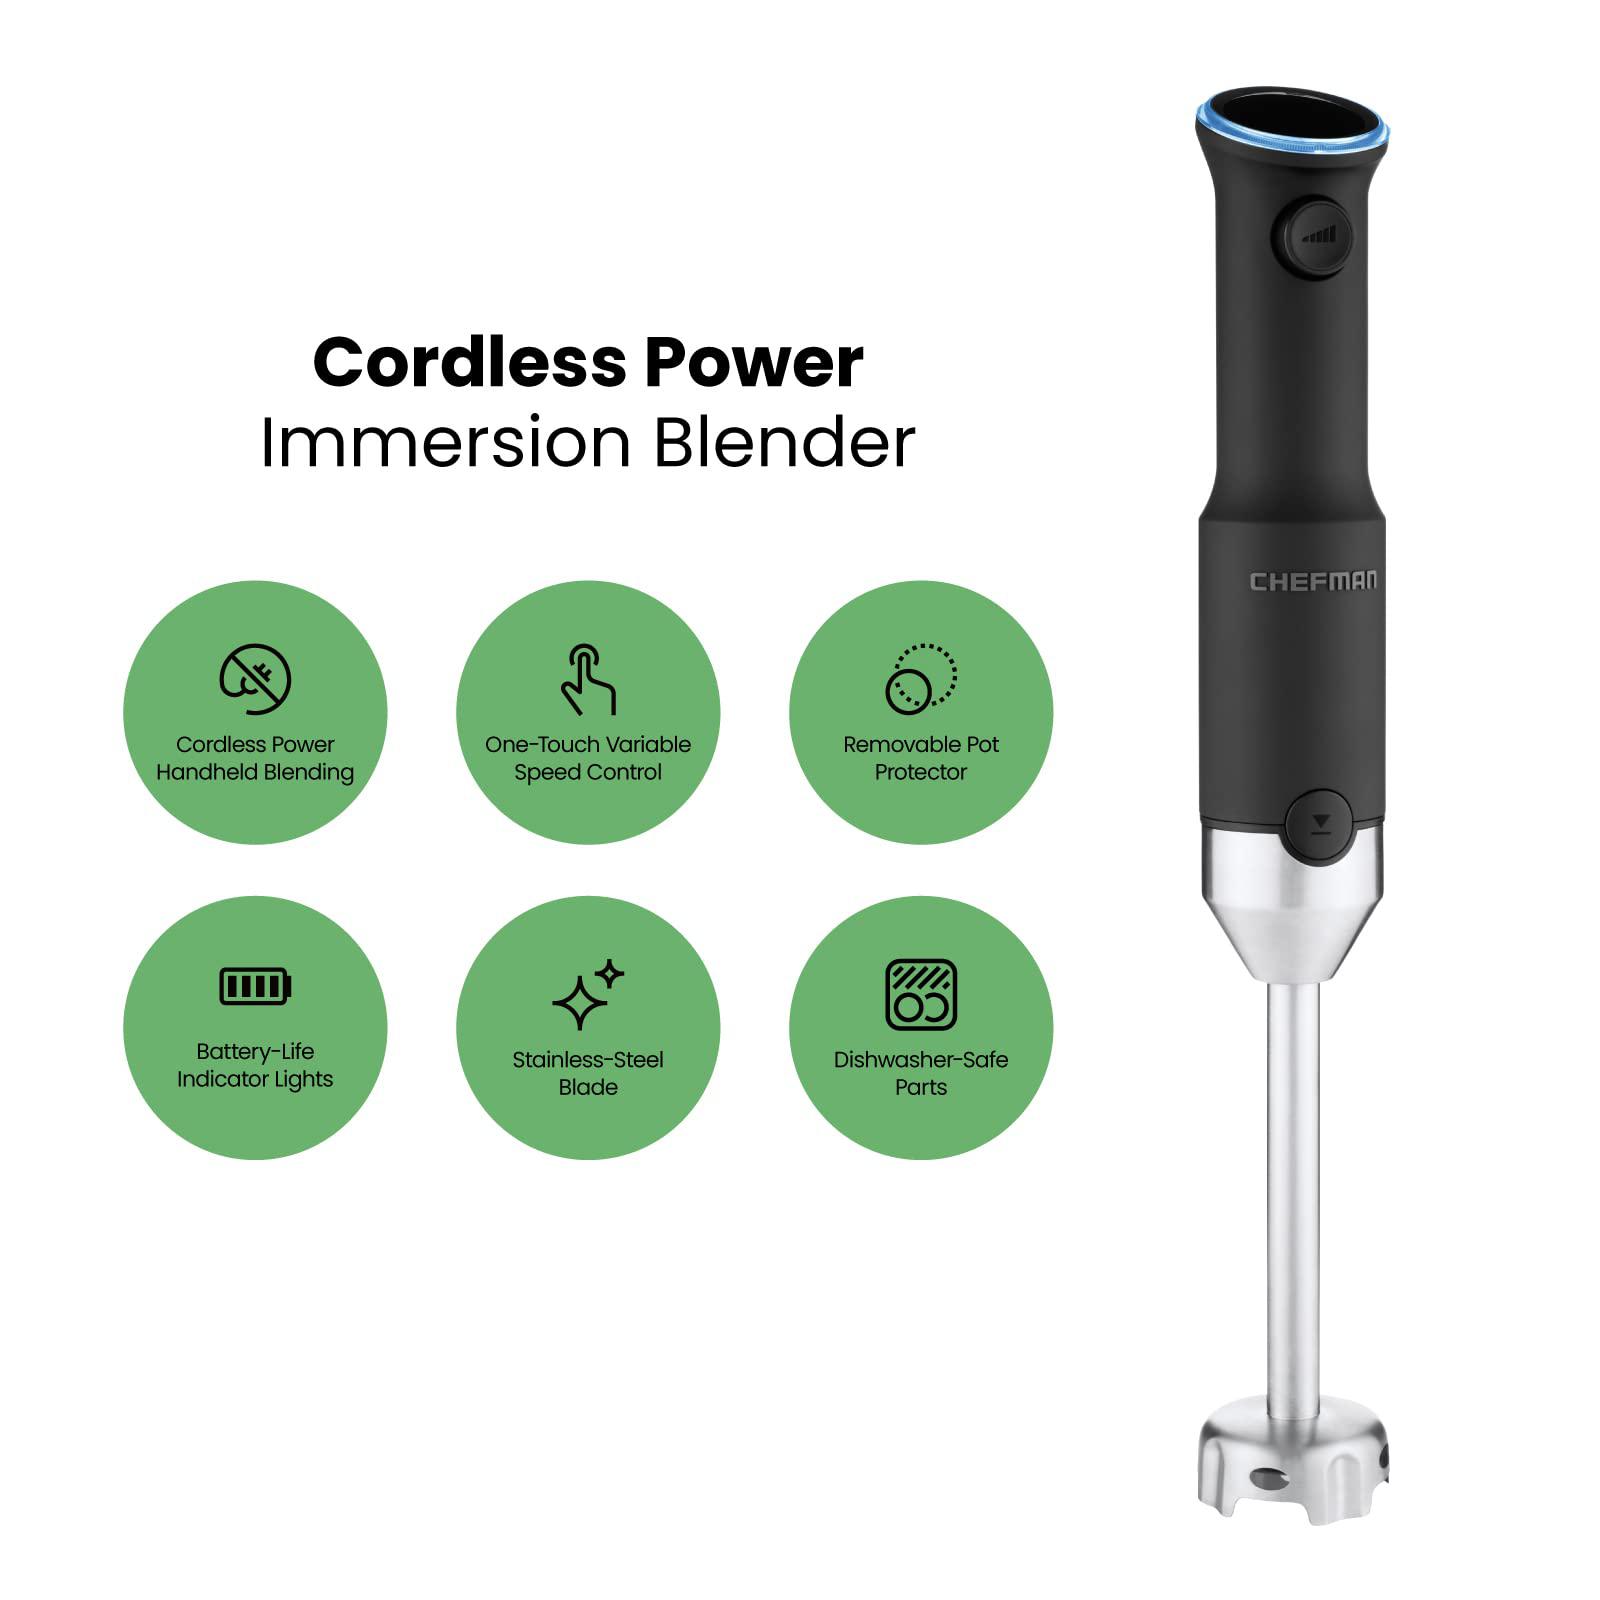 chefman cordless power portable immersion blender, ice crushing power with one-touch speed control, usb charging, quickly mix